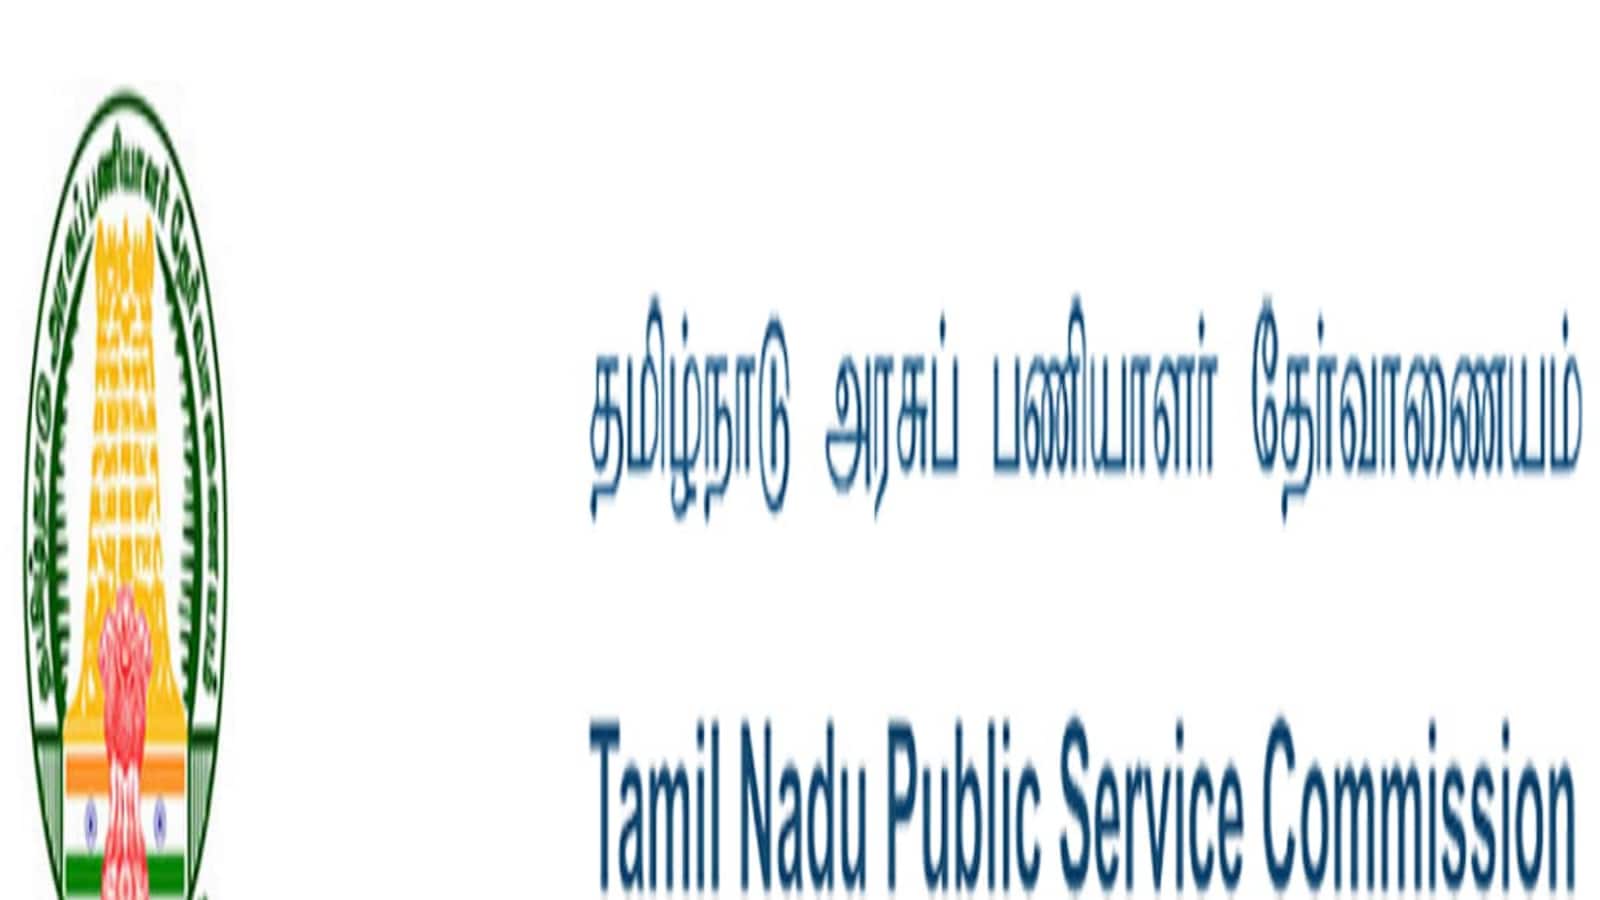 TNPSC Group 2 Result 2022 declared at tnpsc.gov.in, here’s direct link to check